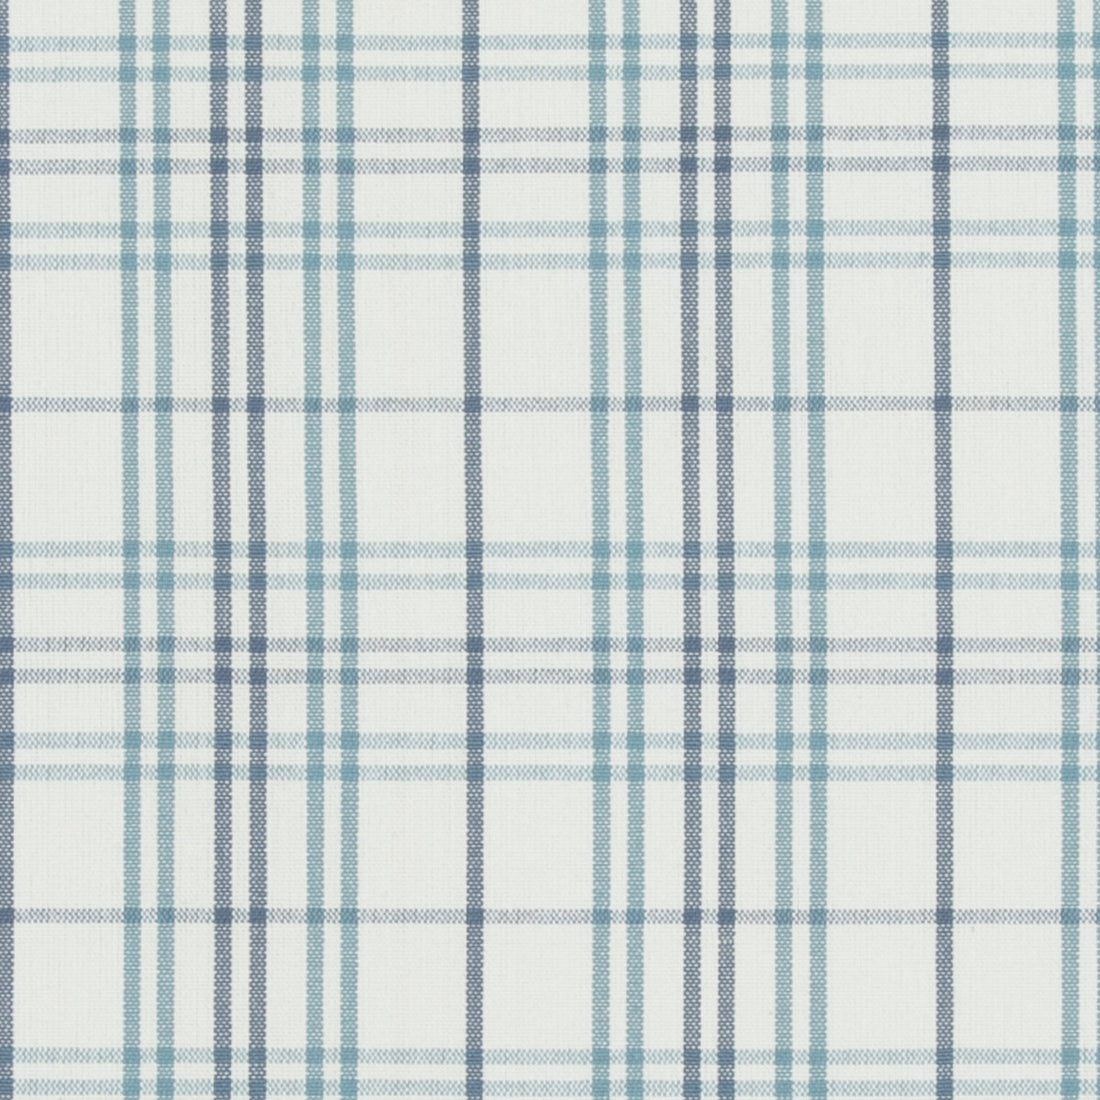 Purbeck Check fabric in aqua color - pattern PF50508.2.0 - by Baker Lifestyle in the Bridport collection